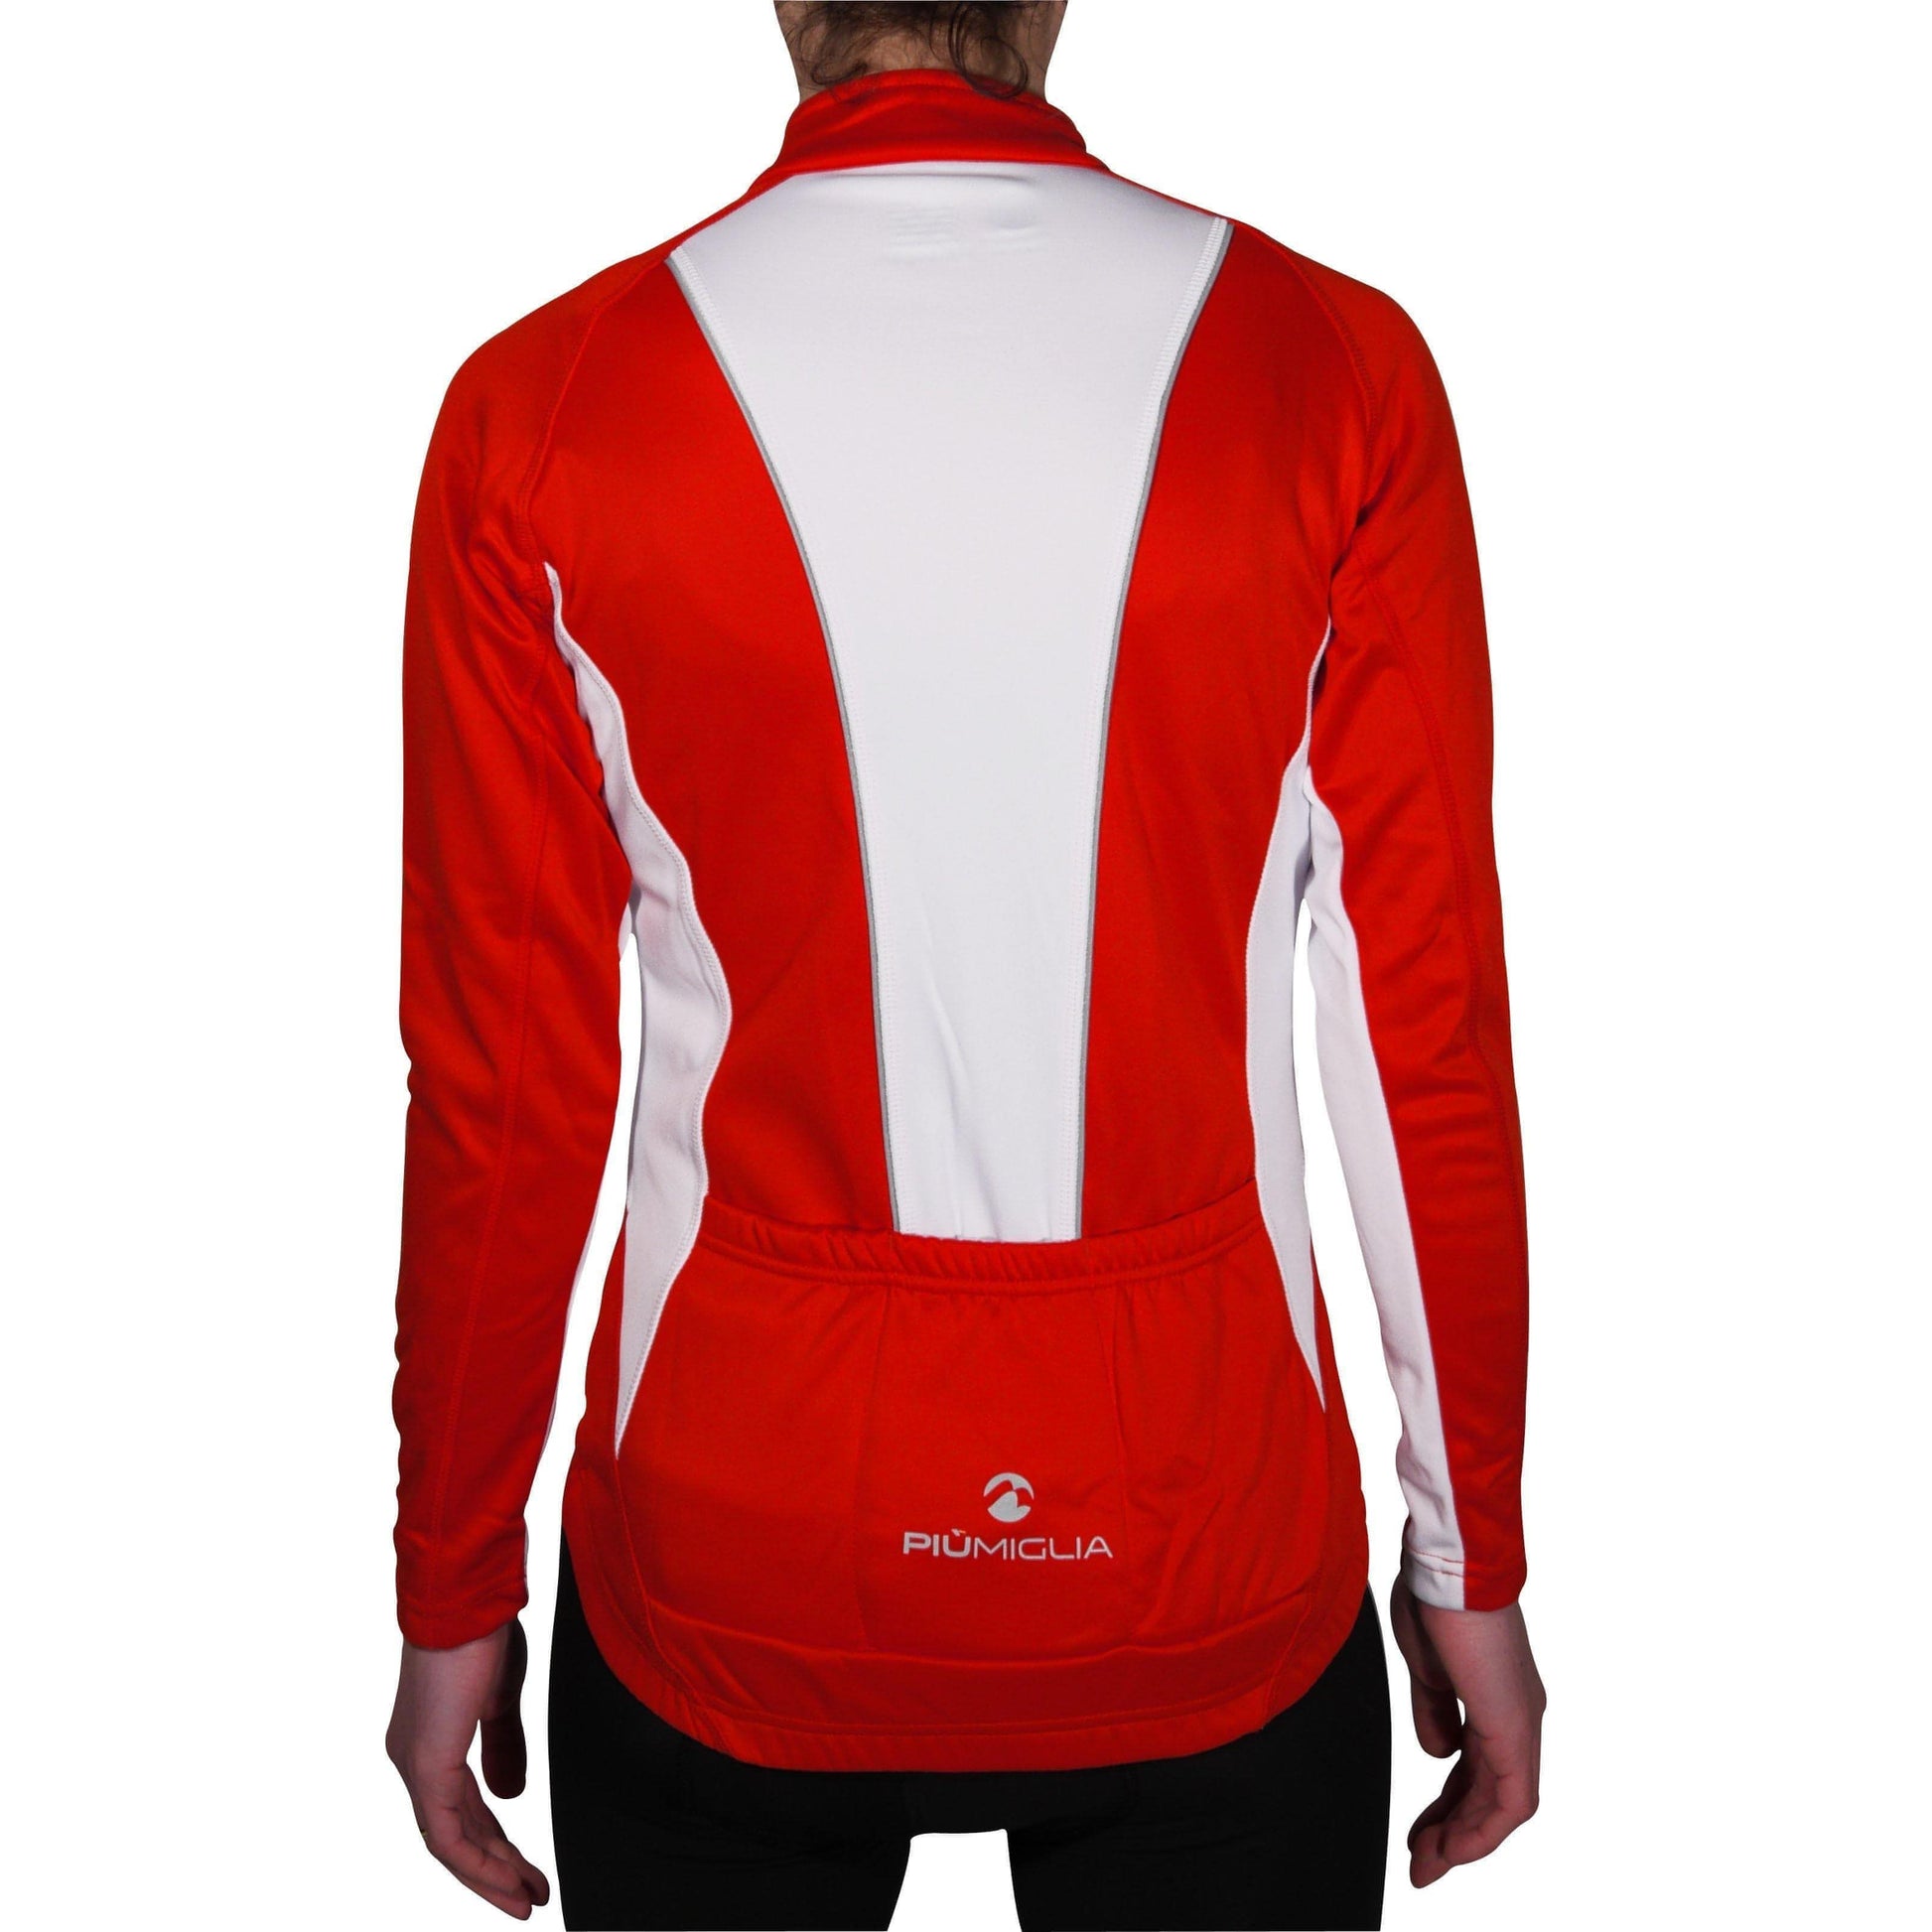 Piu Miglia Thermal Long Sleeve Womens Cycling Jersey - Red - Start Fitness